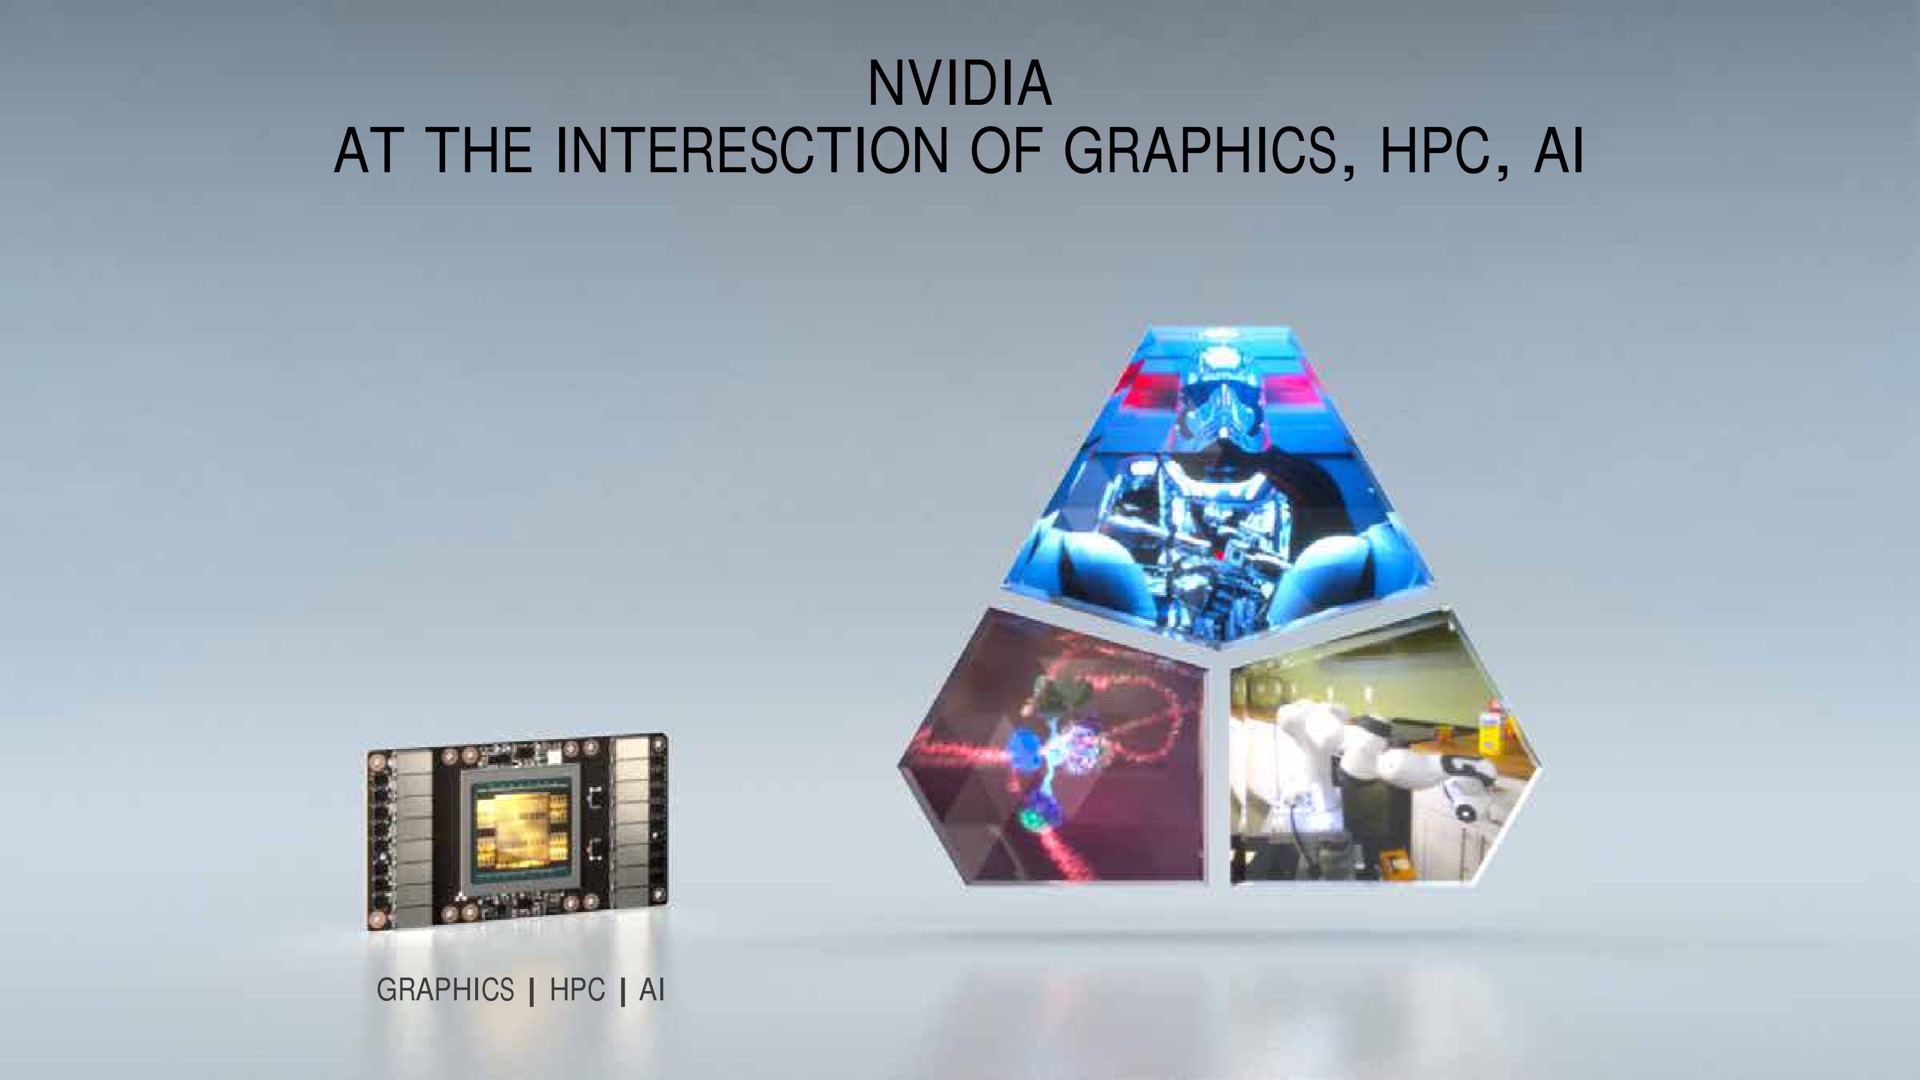 at the of graphics | NVIDIA